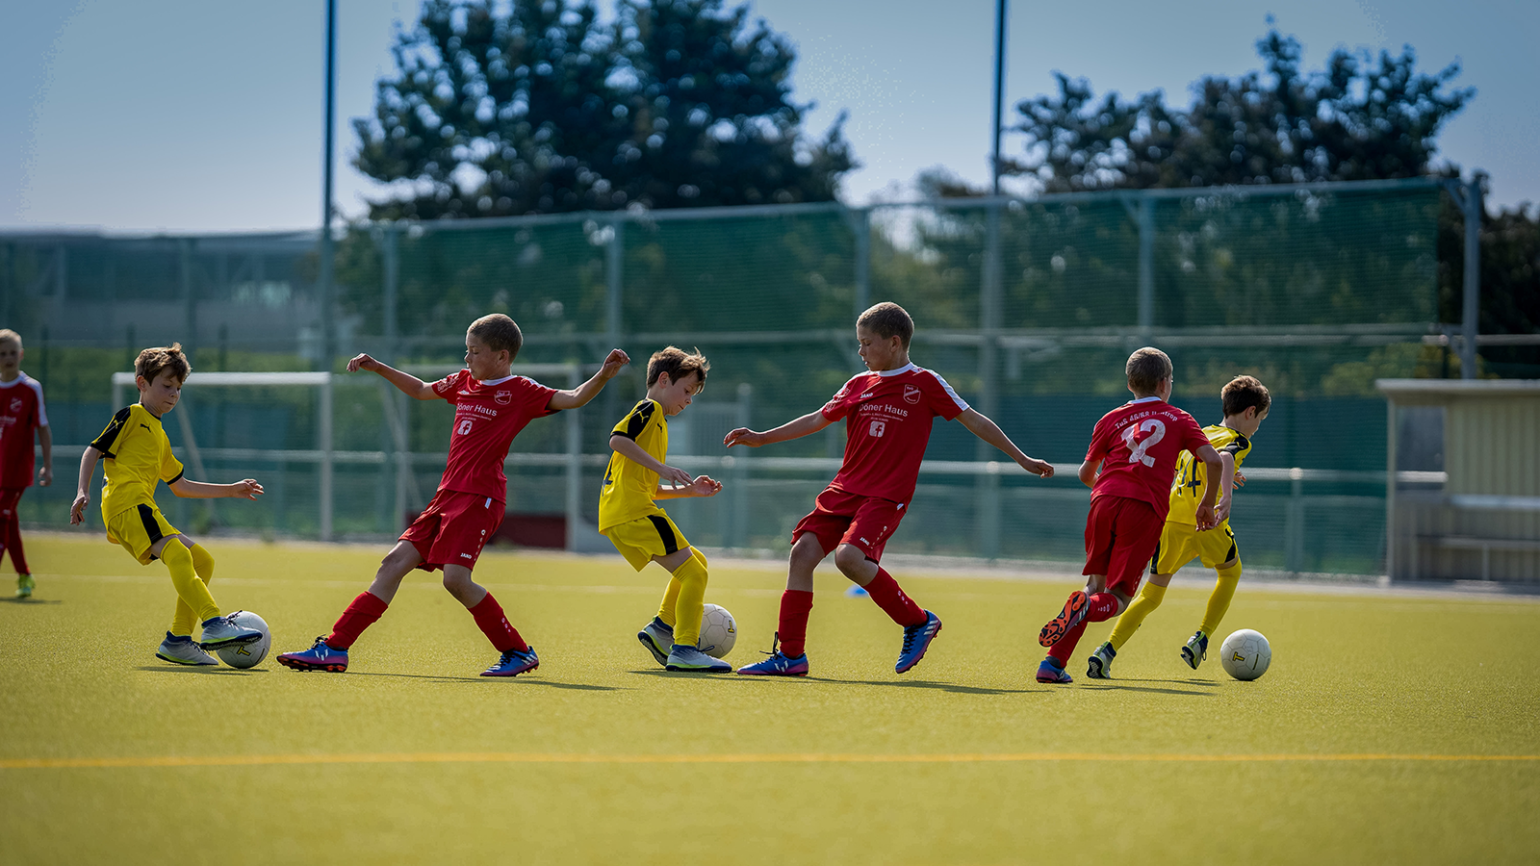 Got an athletic child or hoping to make them more so? Marin and the Bay Area have ample opportunities for kids who want to be active at camp.